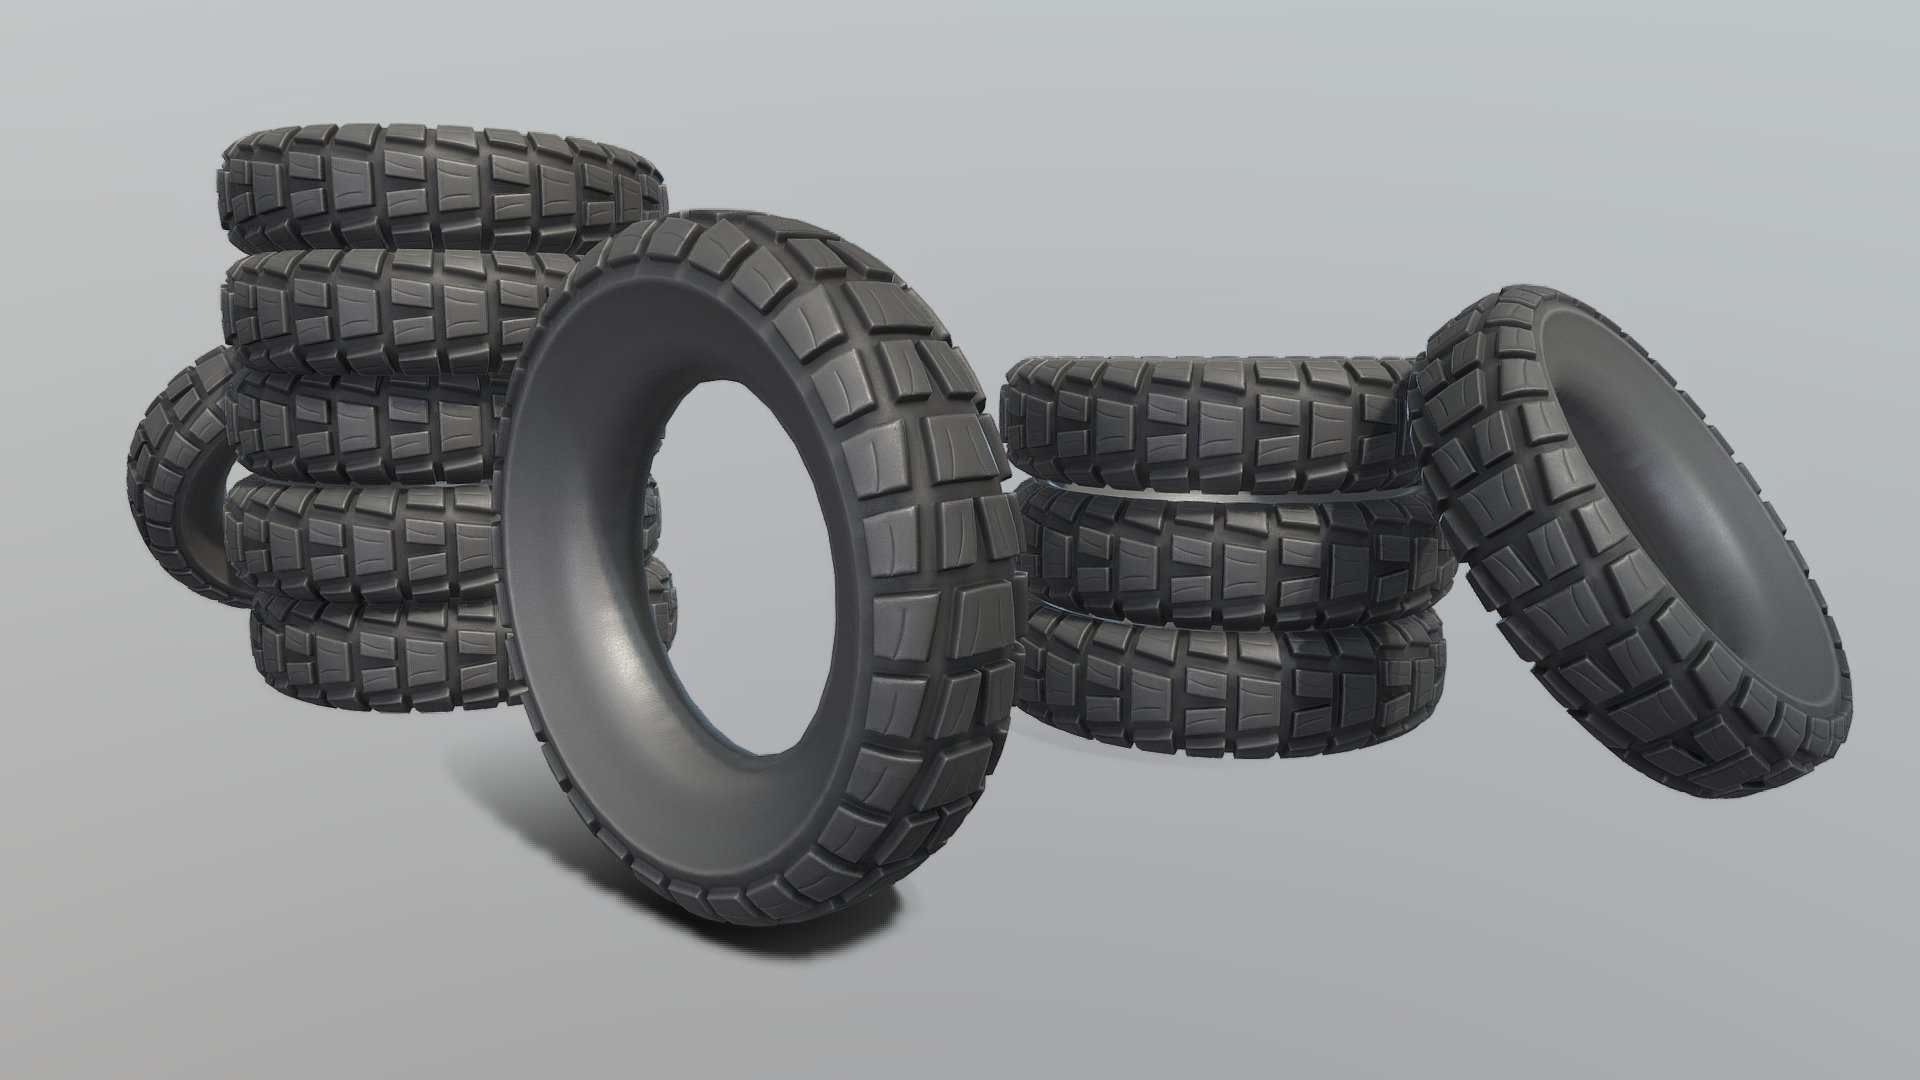 Offroad E- Scooter Wheel (Low-Poly).






Object Name - Offroad_E_Scooter_Wheel 

Object Dimensions -  0.245m x 0.063m x 0.245m

Polygons = 2220



Material - Offroad_E_Scooter_Wheel:




Blend Mode: OPAQUE

Shadow Mode: OPAQUE

Offroad_E_Scooter_Wheel_Col.png(4096x4096px)

Offroad_E_Scooter_Wheel_Nor.png(4096x4096px)

Offroad_E_Scooter_Wheel_Ro.png(4096x4096px)

Offroad_E_Scooter_Wheel_Met.png(4096x4096px)

Offroad_E_Scooter_Wheel_Cav.png(4096x4096px)






Modifier = Yes
         1 - Triangulate






Animation = No

Shape Keys = No







Available Exchange Format




Blender (.blend 2.93) Native



Autodesk FBX (.fbx)

OBJ (.obj, .mtl)

glTF (.gltf, .glb)

X3D (.x3d)

Collada (.dae)

Stereolithography (.stl)

Polygon File Format (.ply)

Alembic (.abc)

DXF (.dxf)

USDC



3D modelled and textured by 3DHaupt in Blender 2.9 3d model